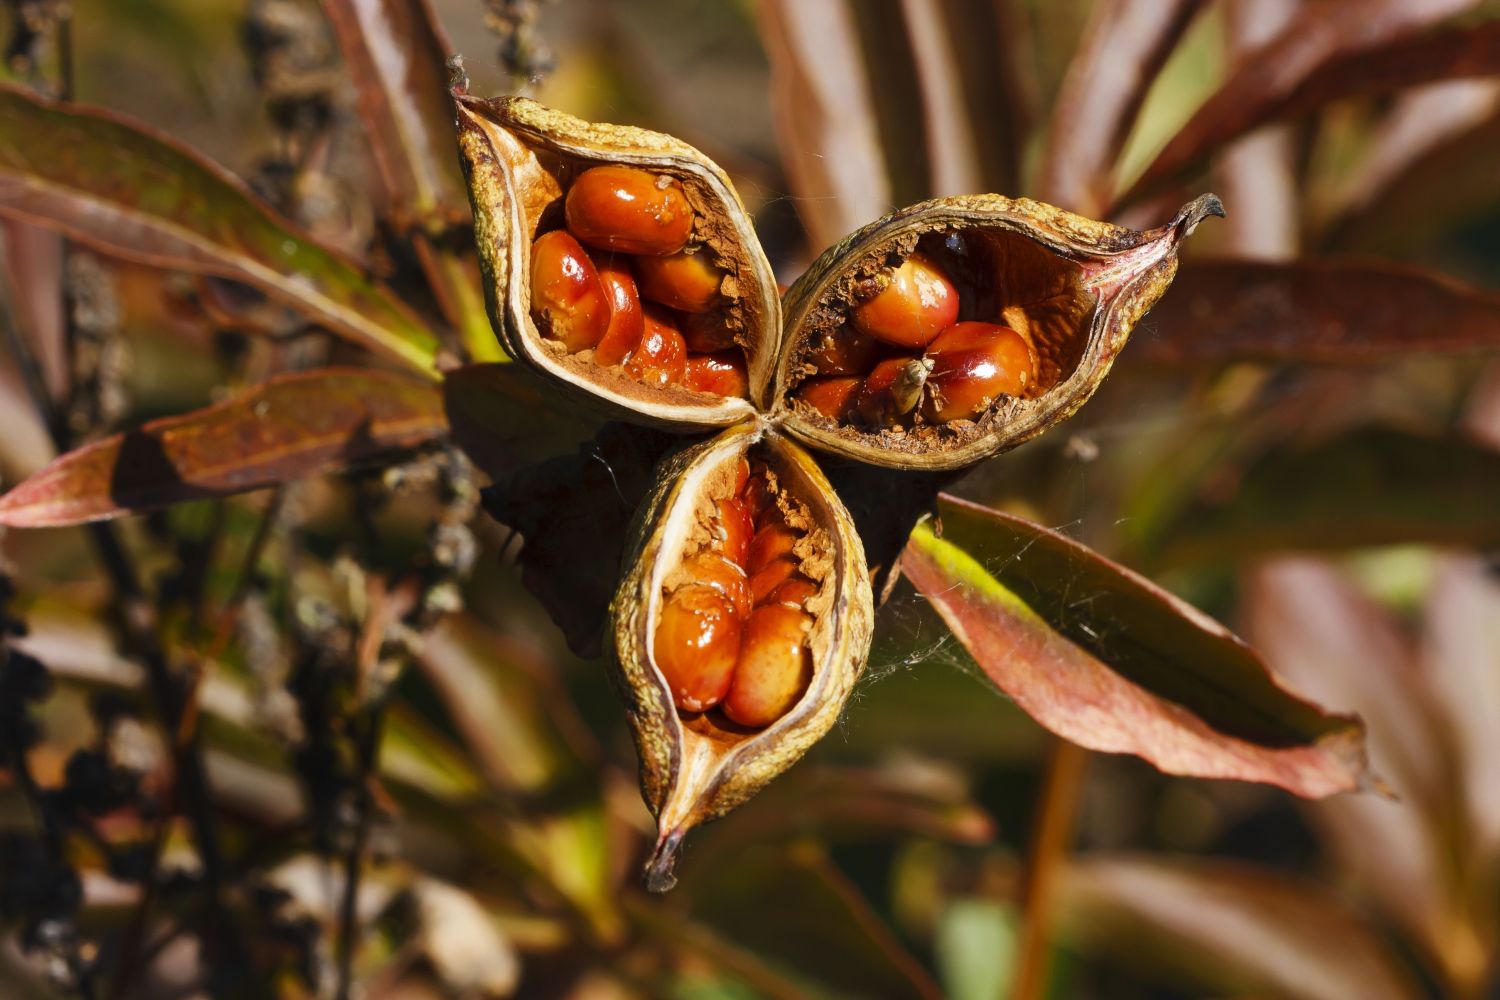 Lily seeds in pods